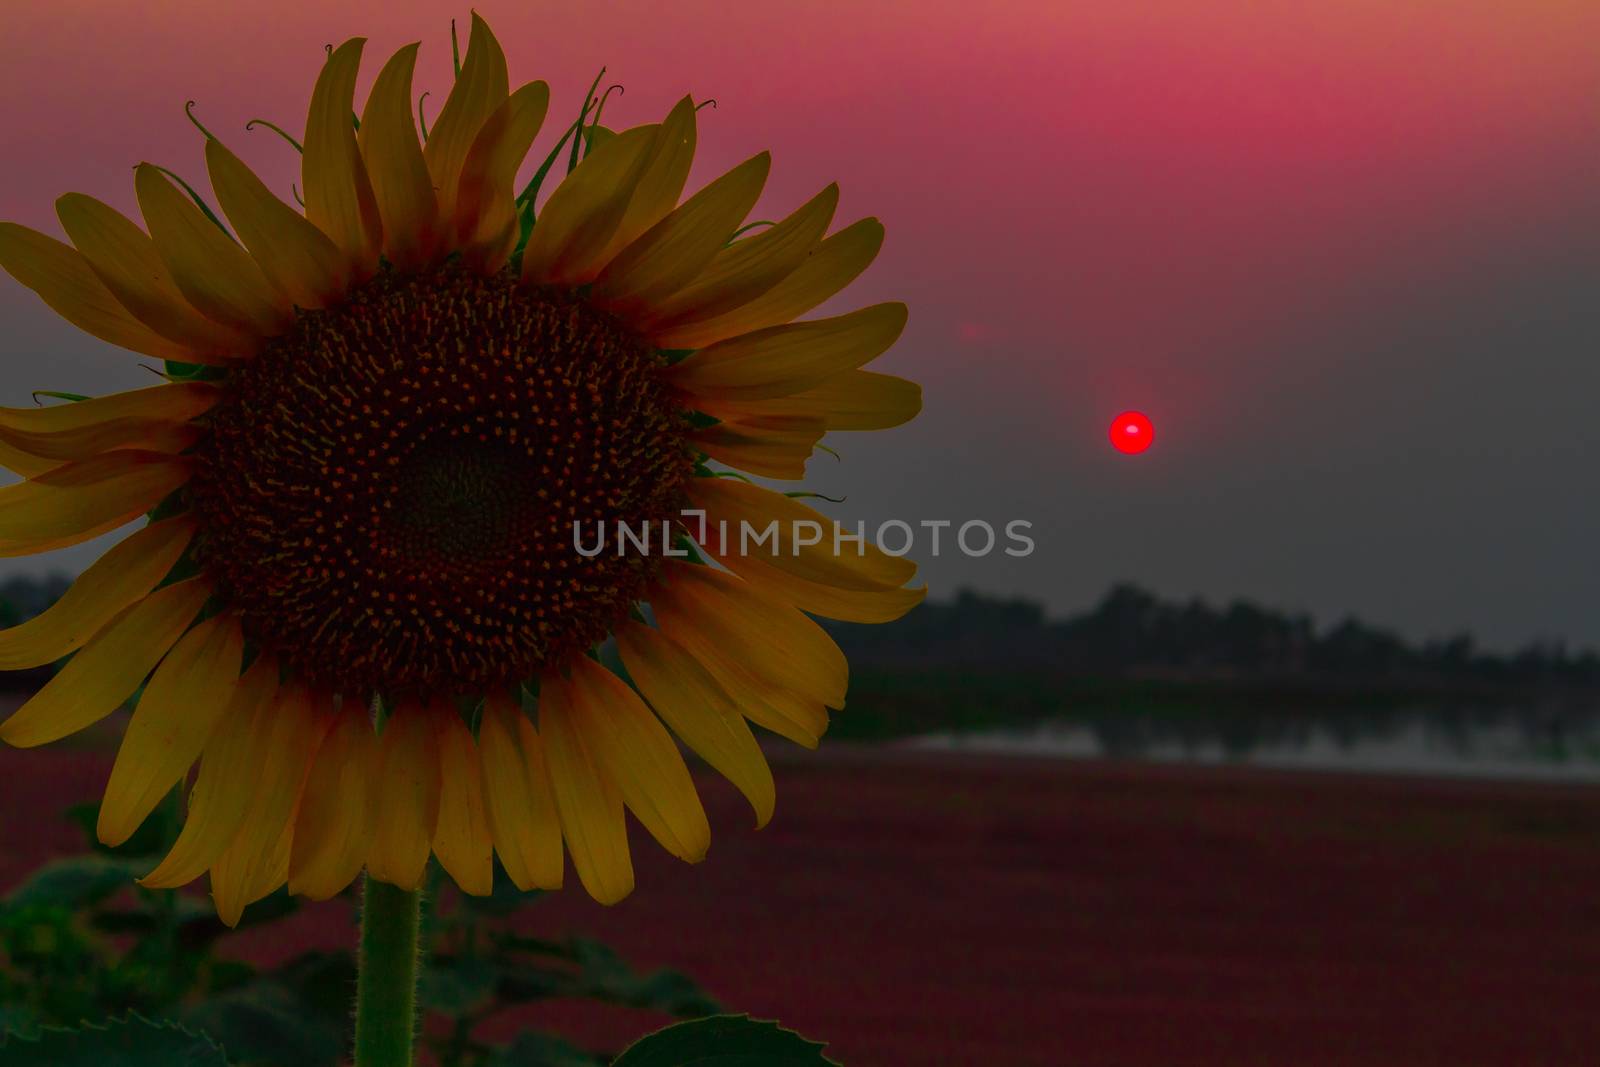 Silhouette of sunflower in the field at sunset, feeling dark tone